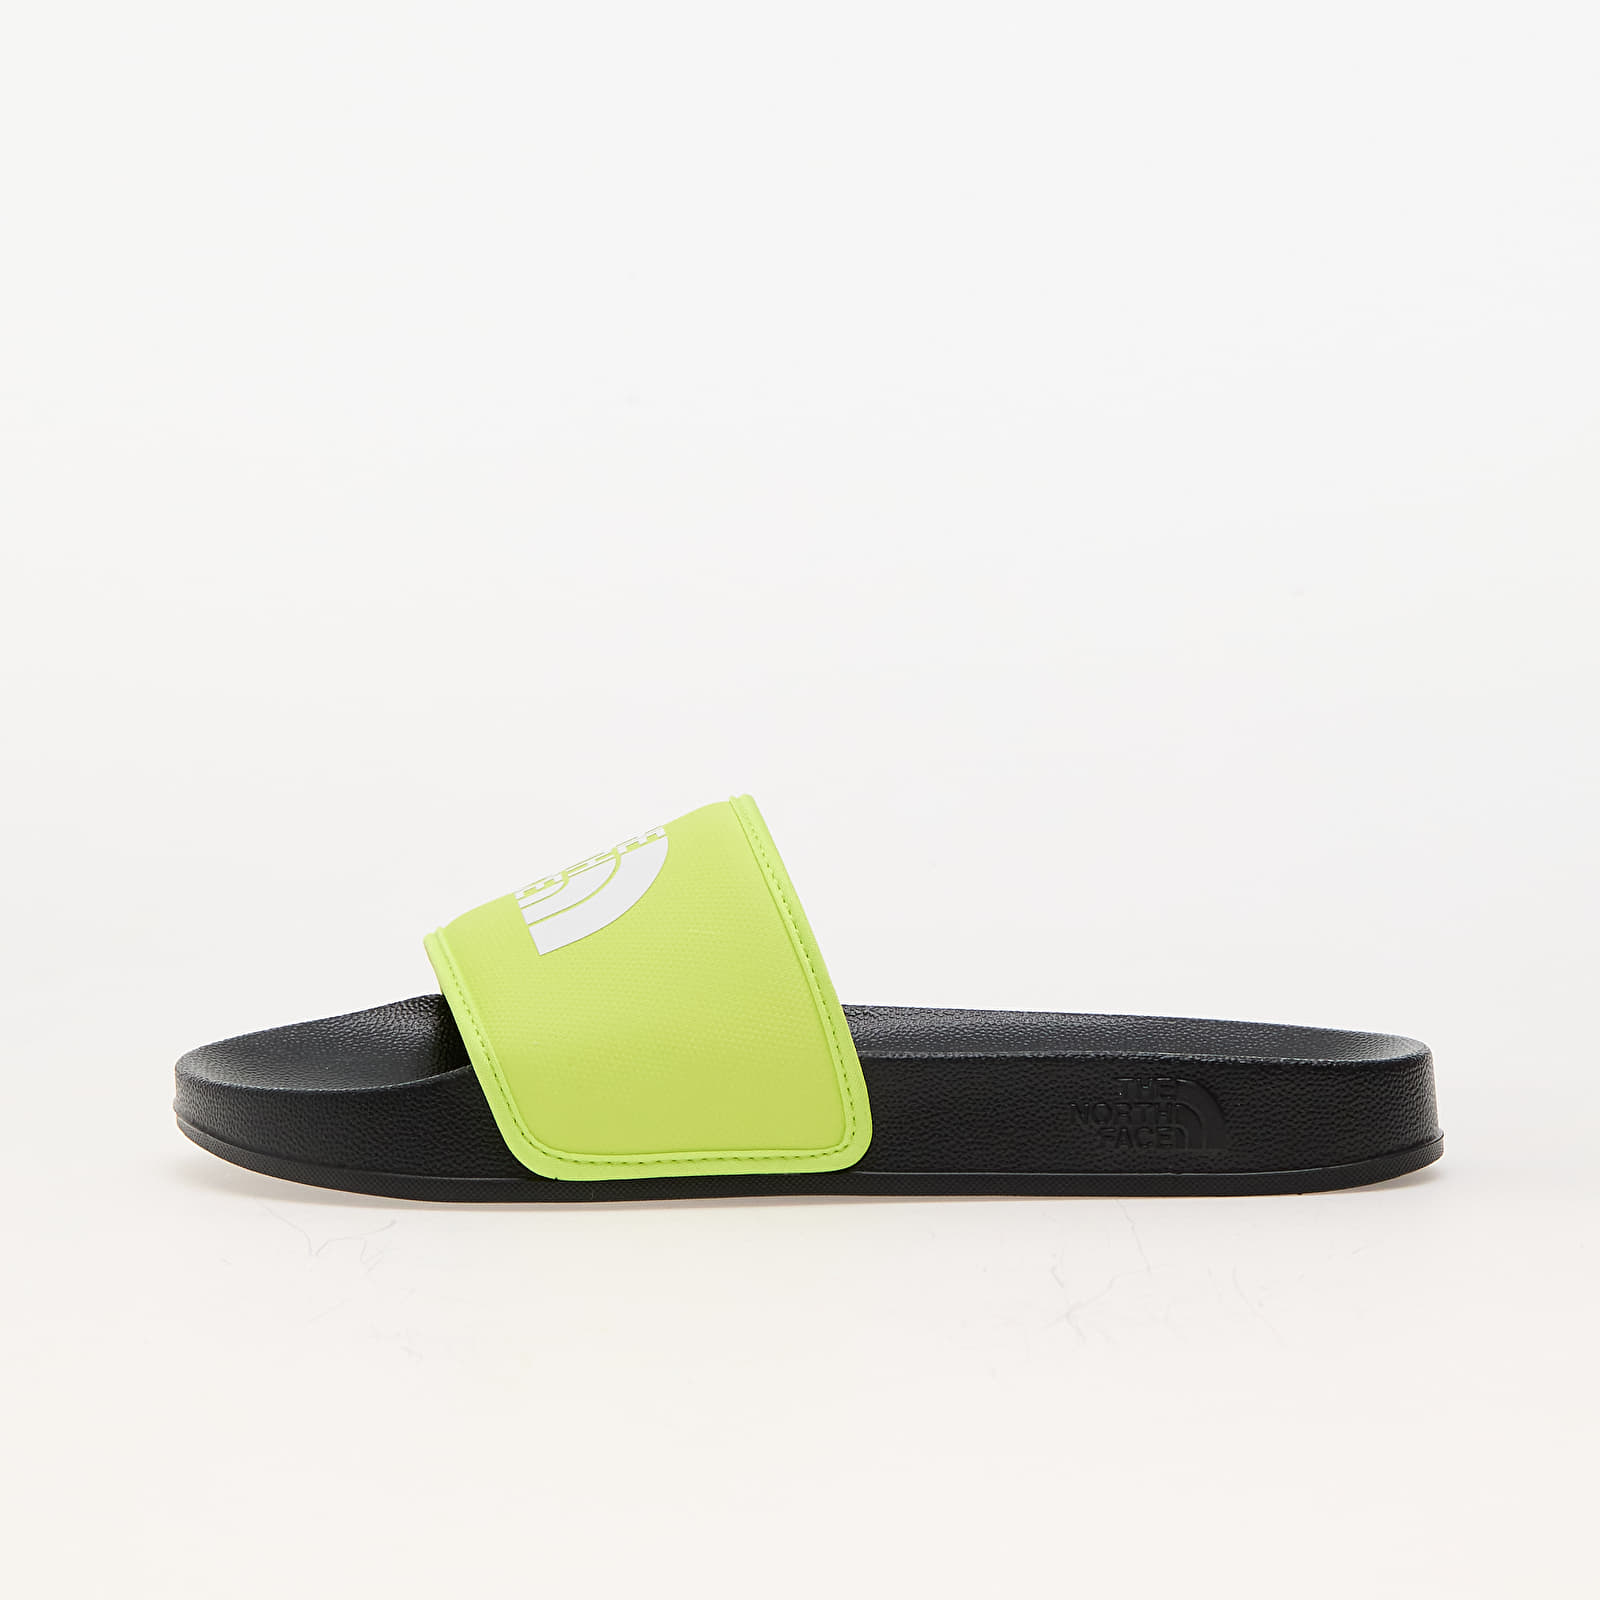 Chaussures et baskets homme The North Face Base Camp Slide III Fizz Lime/ TNF Black